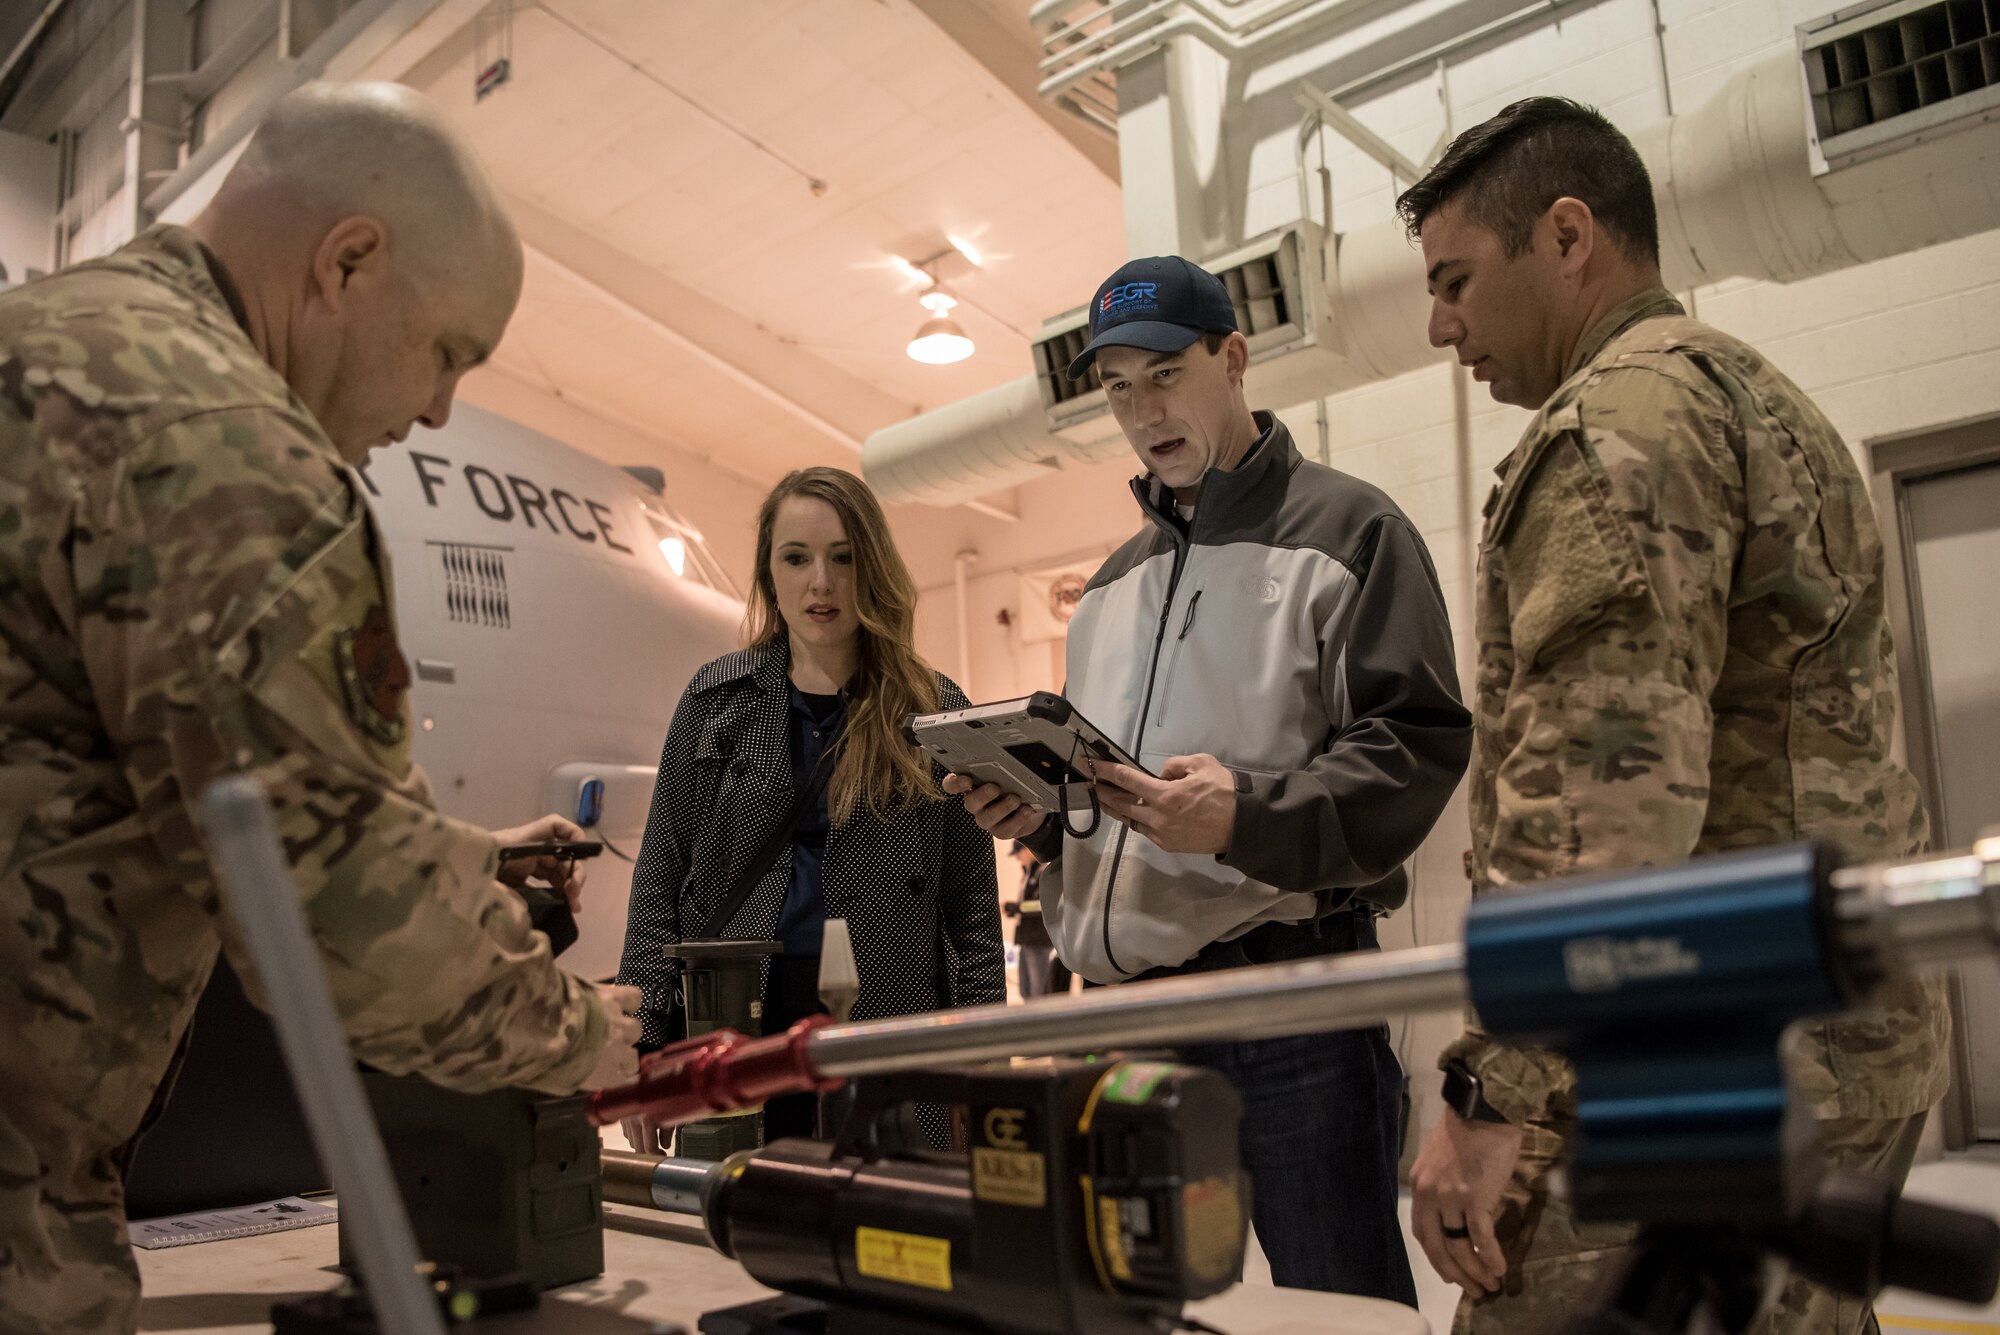 Master Sgt. Matthew Wilt of the 123rd Explosive Ordnance Disposal Flight, demonstrates the use of EOD equipment to civilian employers at the Kentucky Air National Guard Base in Louisville, Ky., March 15, 2019. The employers were participating in an Employer Support of the Guard and Reserve “Bosslift,” which enhances awareness and understanding between National Guardsmen and the civilian employers for whom they work when they’re not on duty. (U.S. Air National Guard photo by Staff Sgt. Joshua Horton)